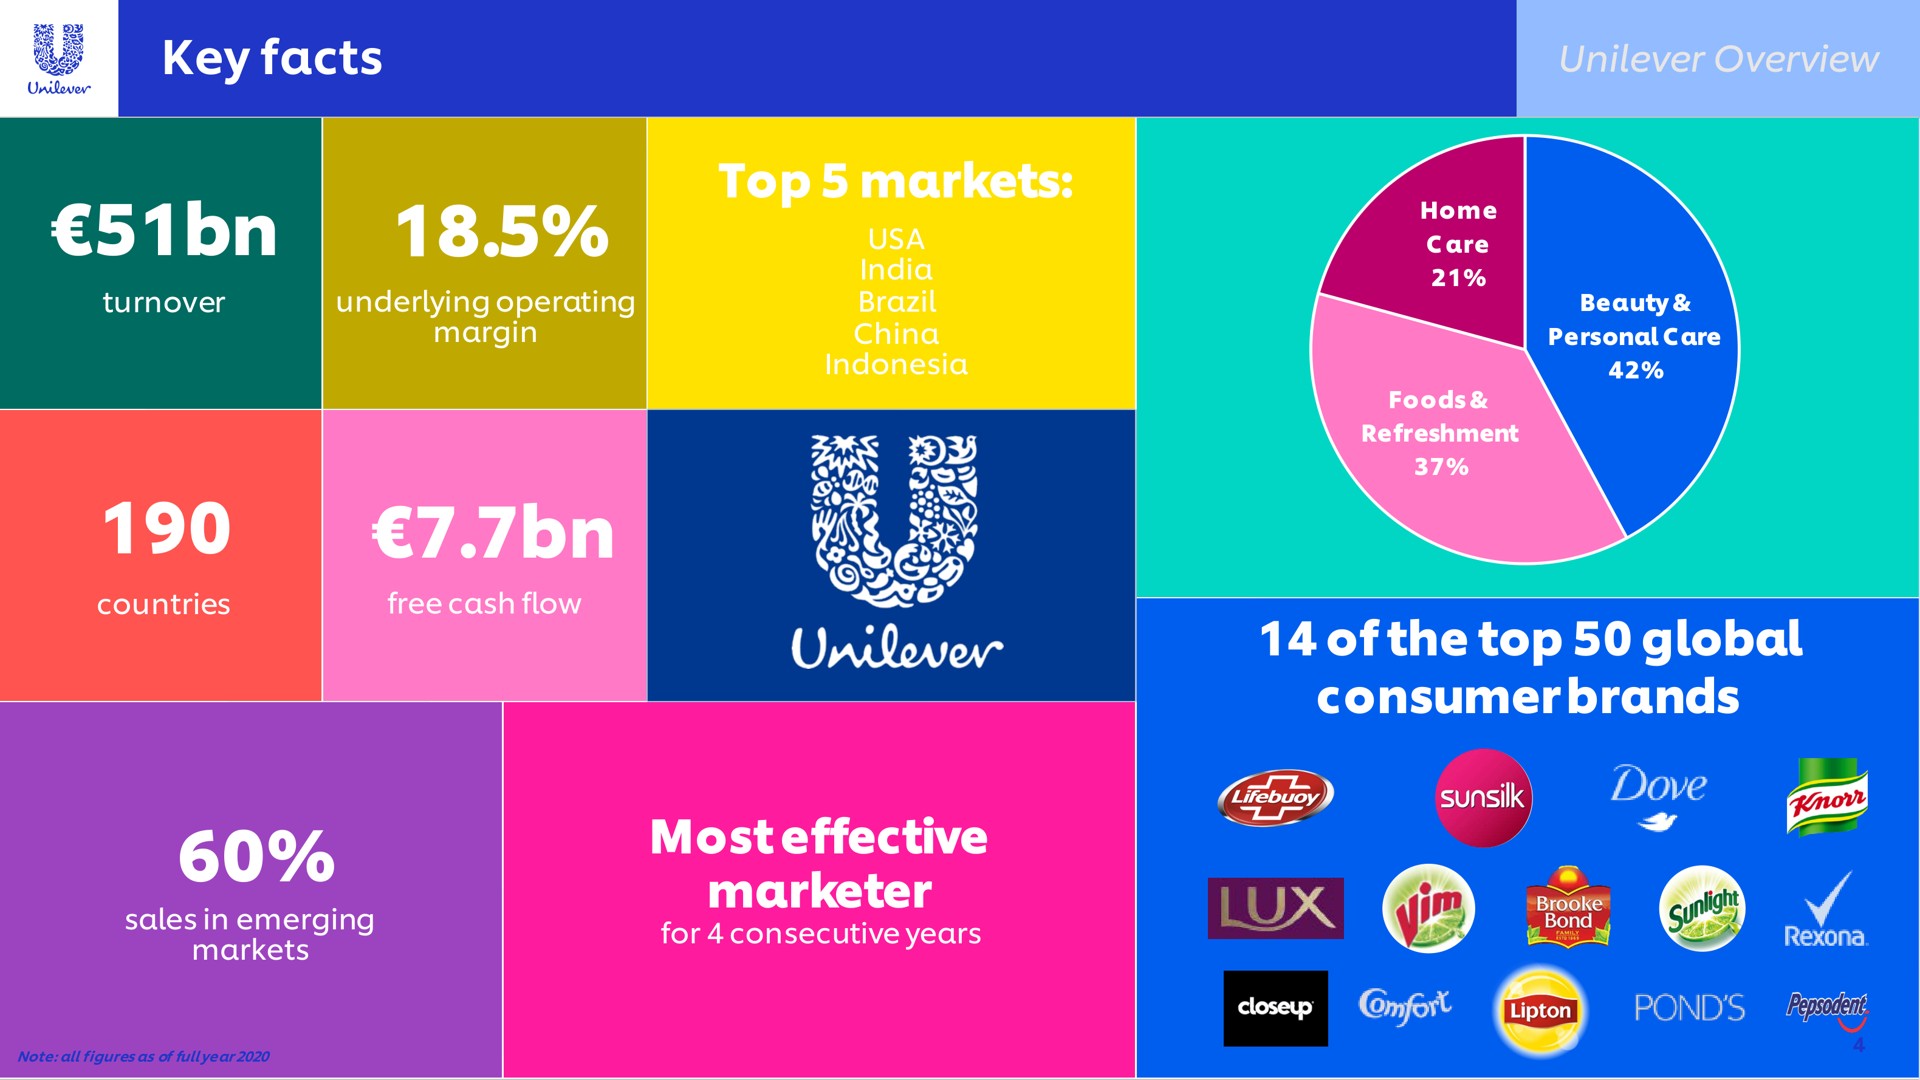 key facts top markets of the top global consumer brands most effective marketer | Unilever